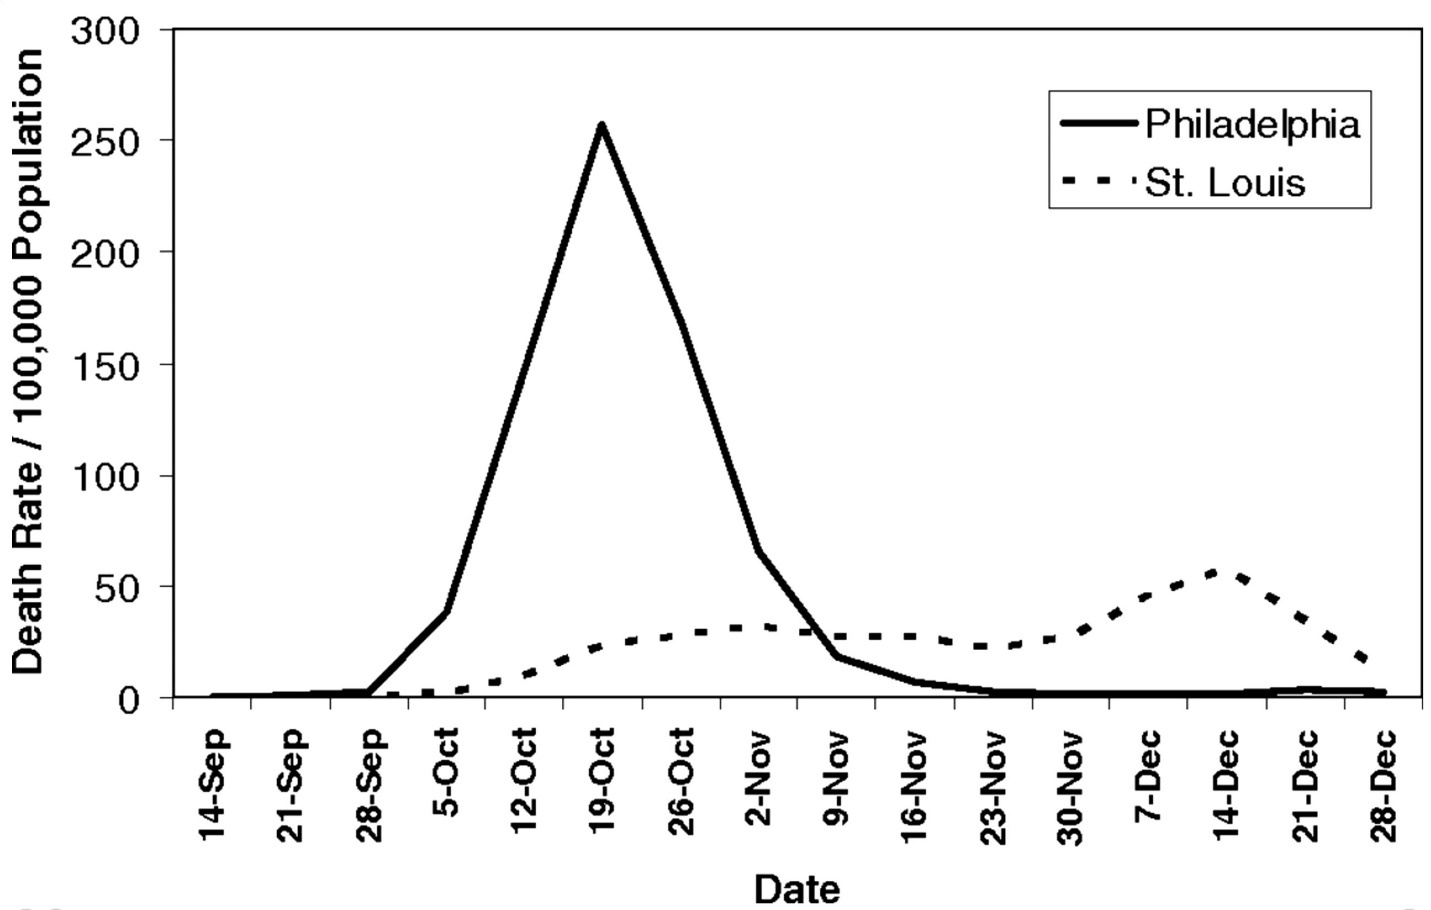 Impact of differing responses to the 1918 Flu pandemic